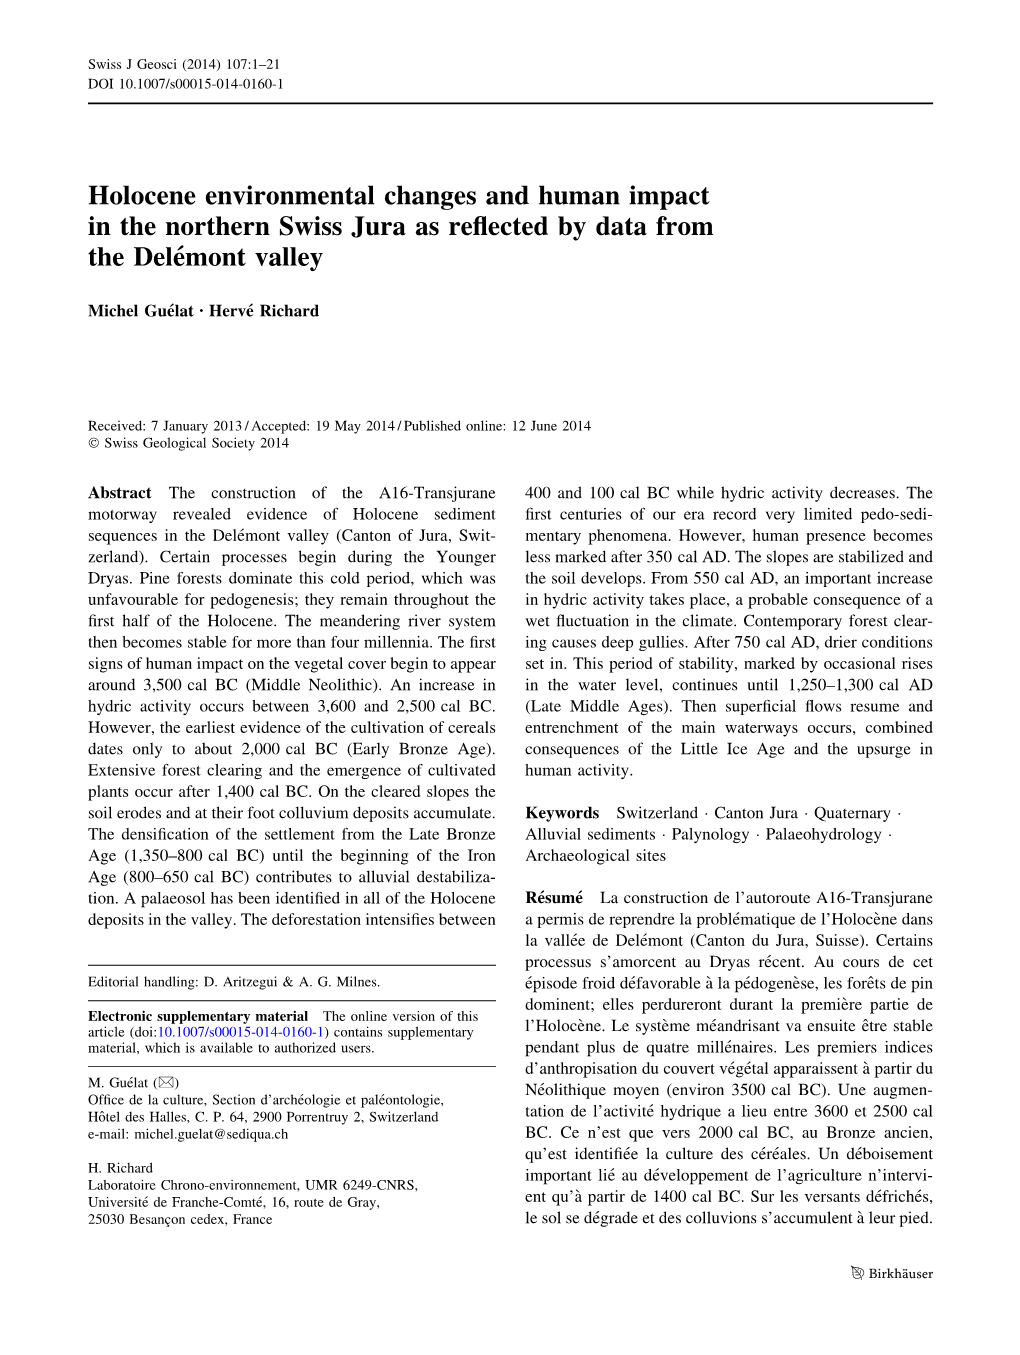 Holocene Environmental Changes and Human Impact in the Northern Swiss Jura As Reﬂected by Data from the Dele´Mont Valley